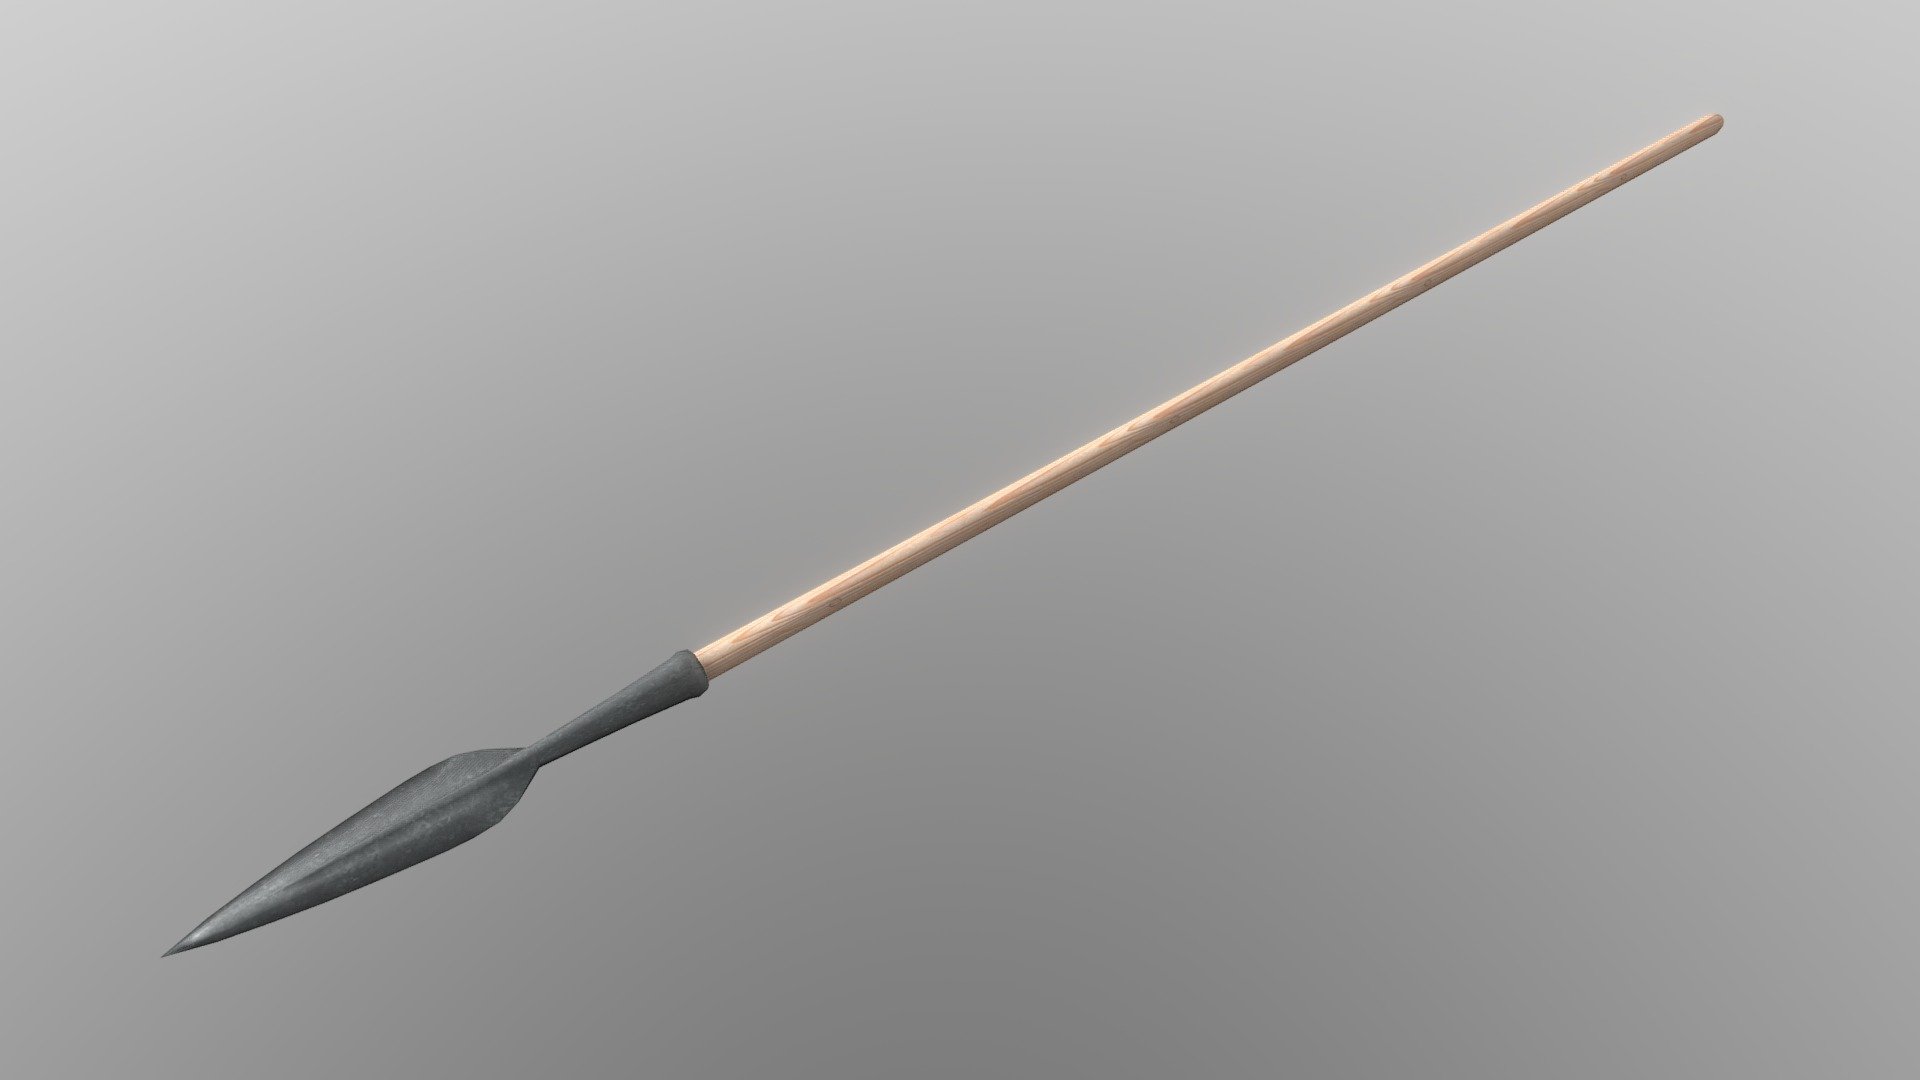 Celtic Spear B
Bring your project to life with this low poly 3D model of an Celtic Spear. Perfect for use in games, animations, VR, AR, and more, this model is optimized for performance and still retains a high level of detail.


Features



Low poly design with 221 vertices

447 edges

230 faces (polygons)

434 tris

2k PBR Textures and materials

File formats included: .obj, .fbx, .dae, .stl


Tools Used
This Celtic Spear low poly 3D model was created using Blender 3.3.1, a popular and versatile 3D creation software.


Availability
This low poly Celtic Spear 3D model is ready for use and available for purchase. Bring your project to the next level with this high-quality and optimized model 3d model